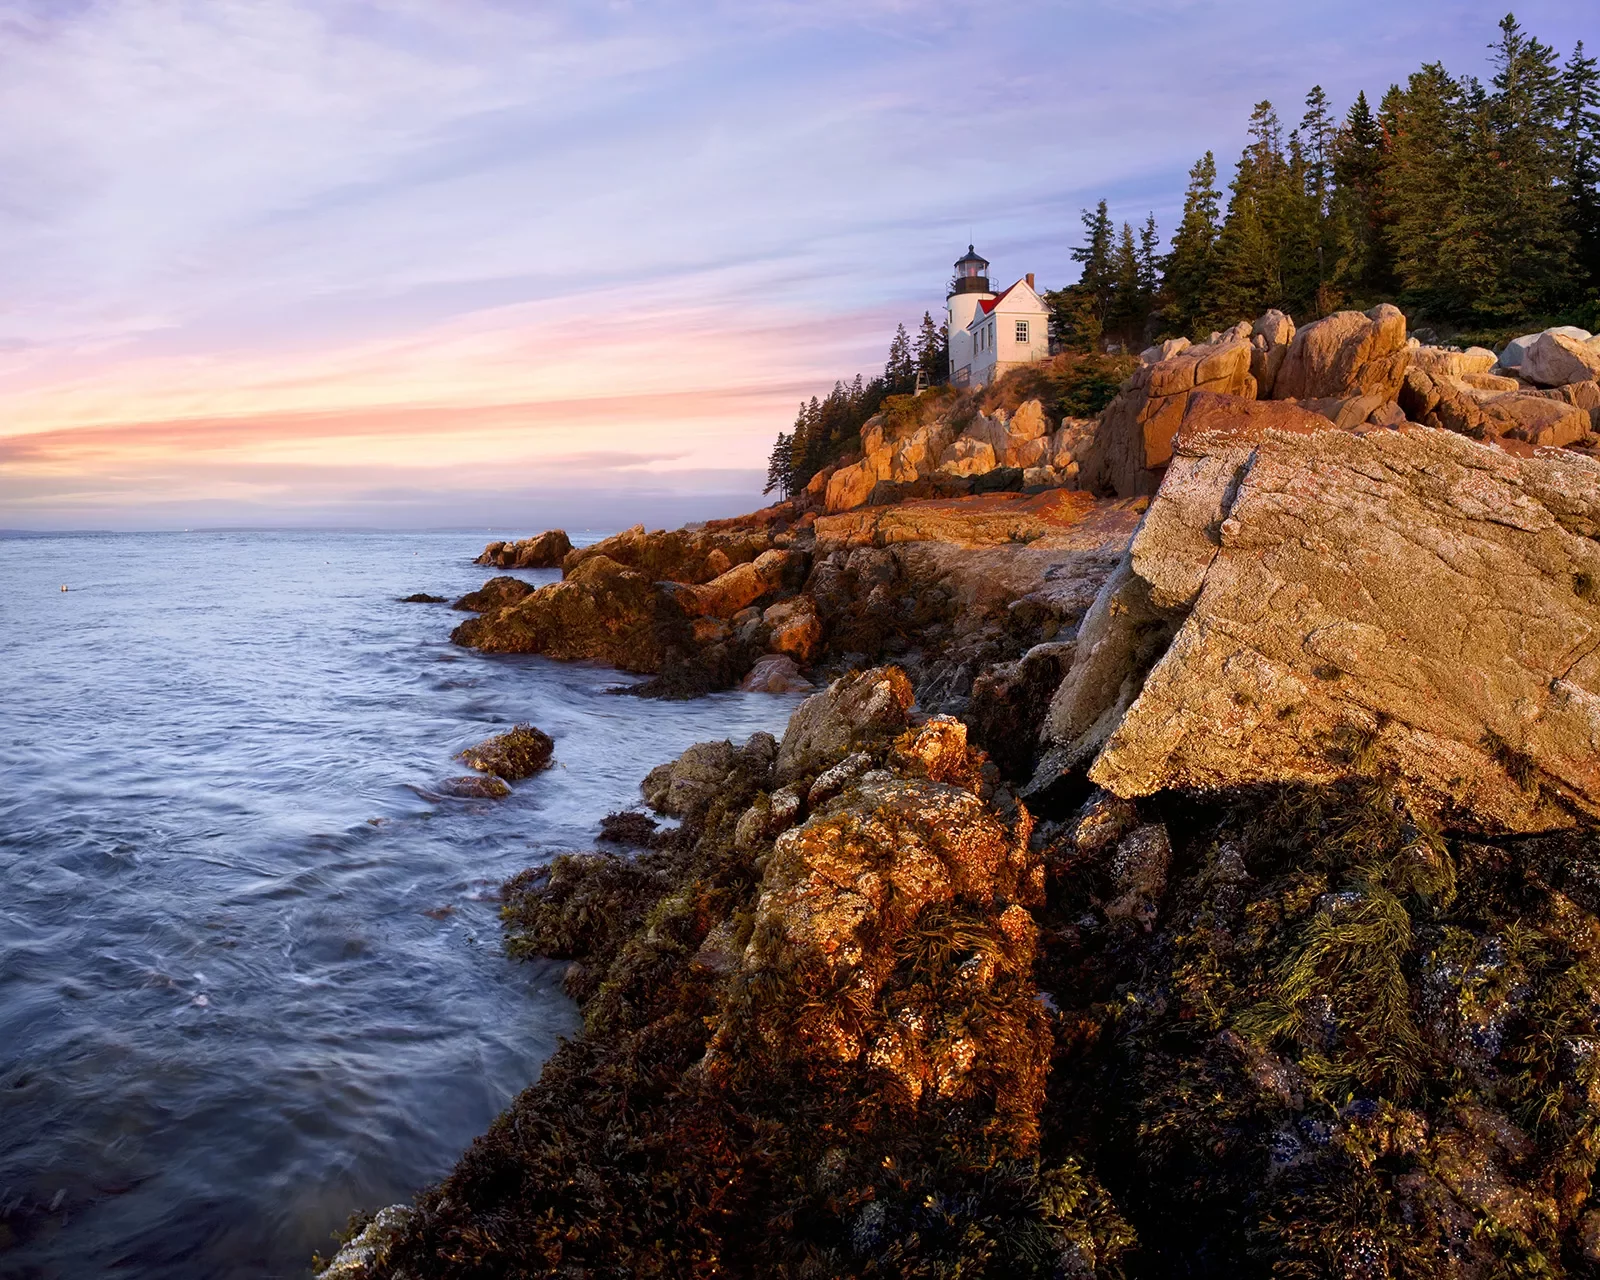 Wide shot of craggy inlet, small white lighthouse, sunset.